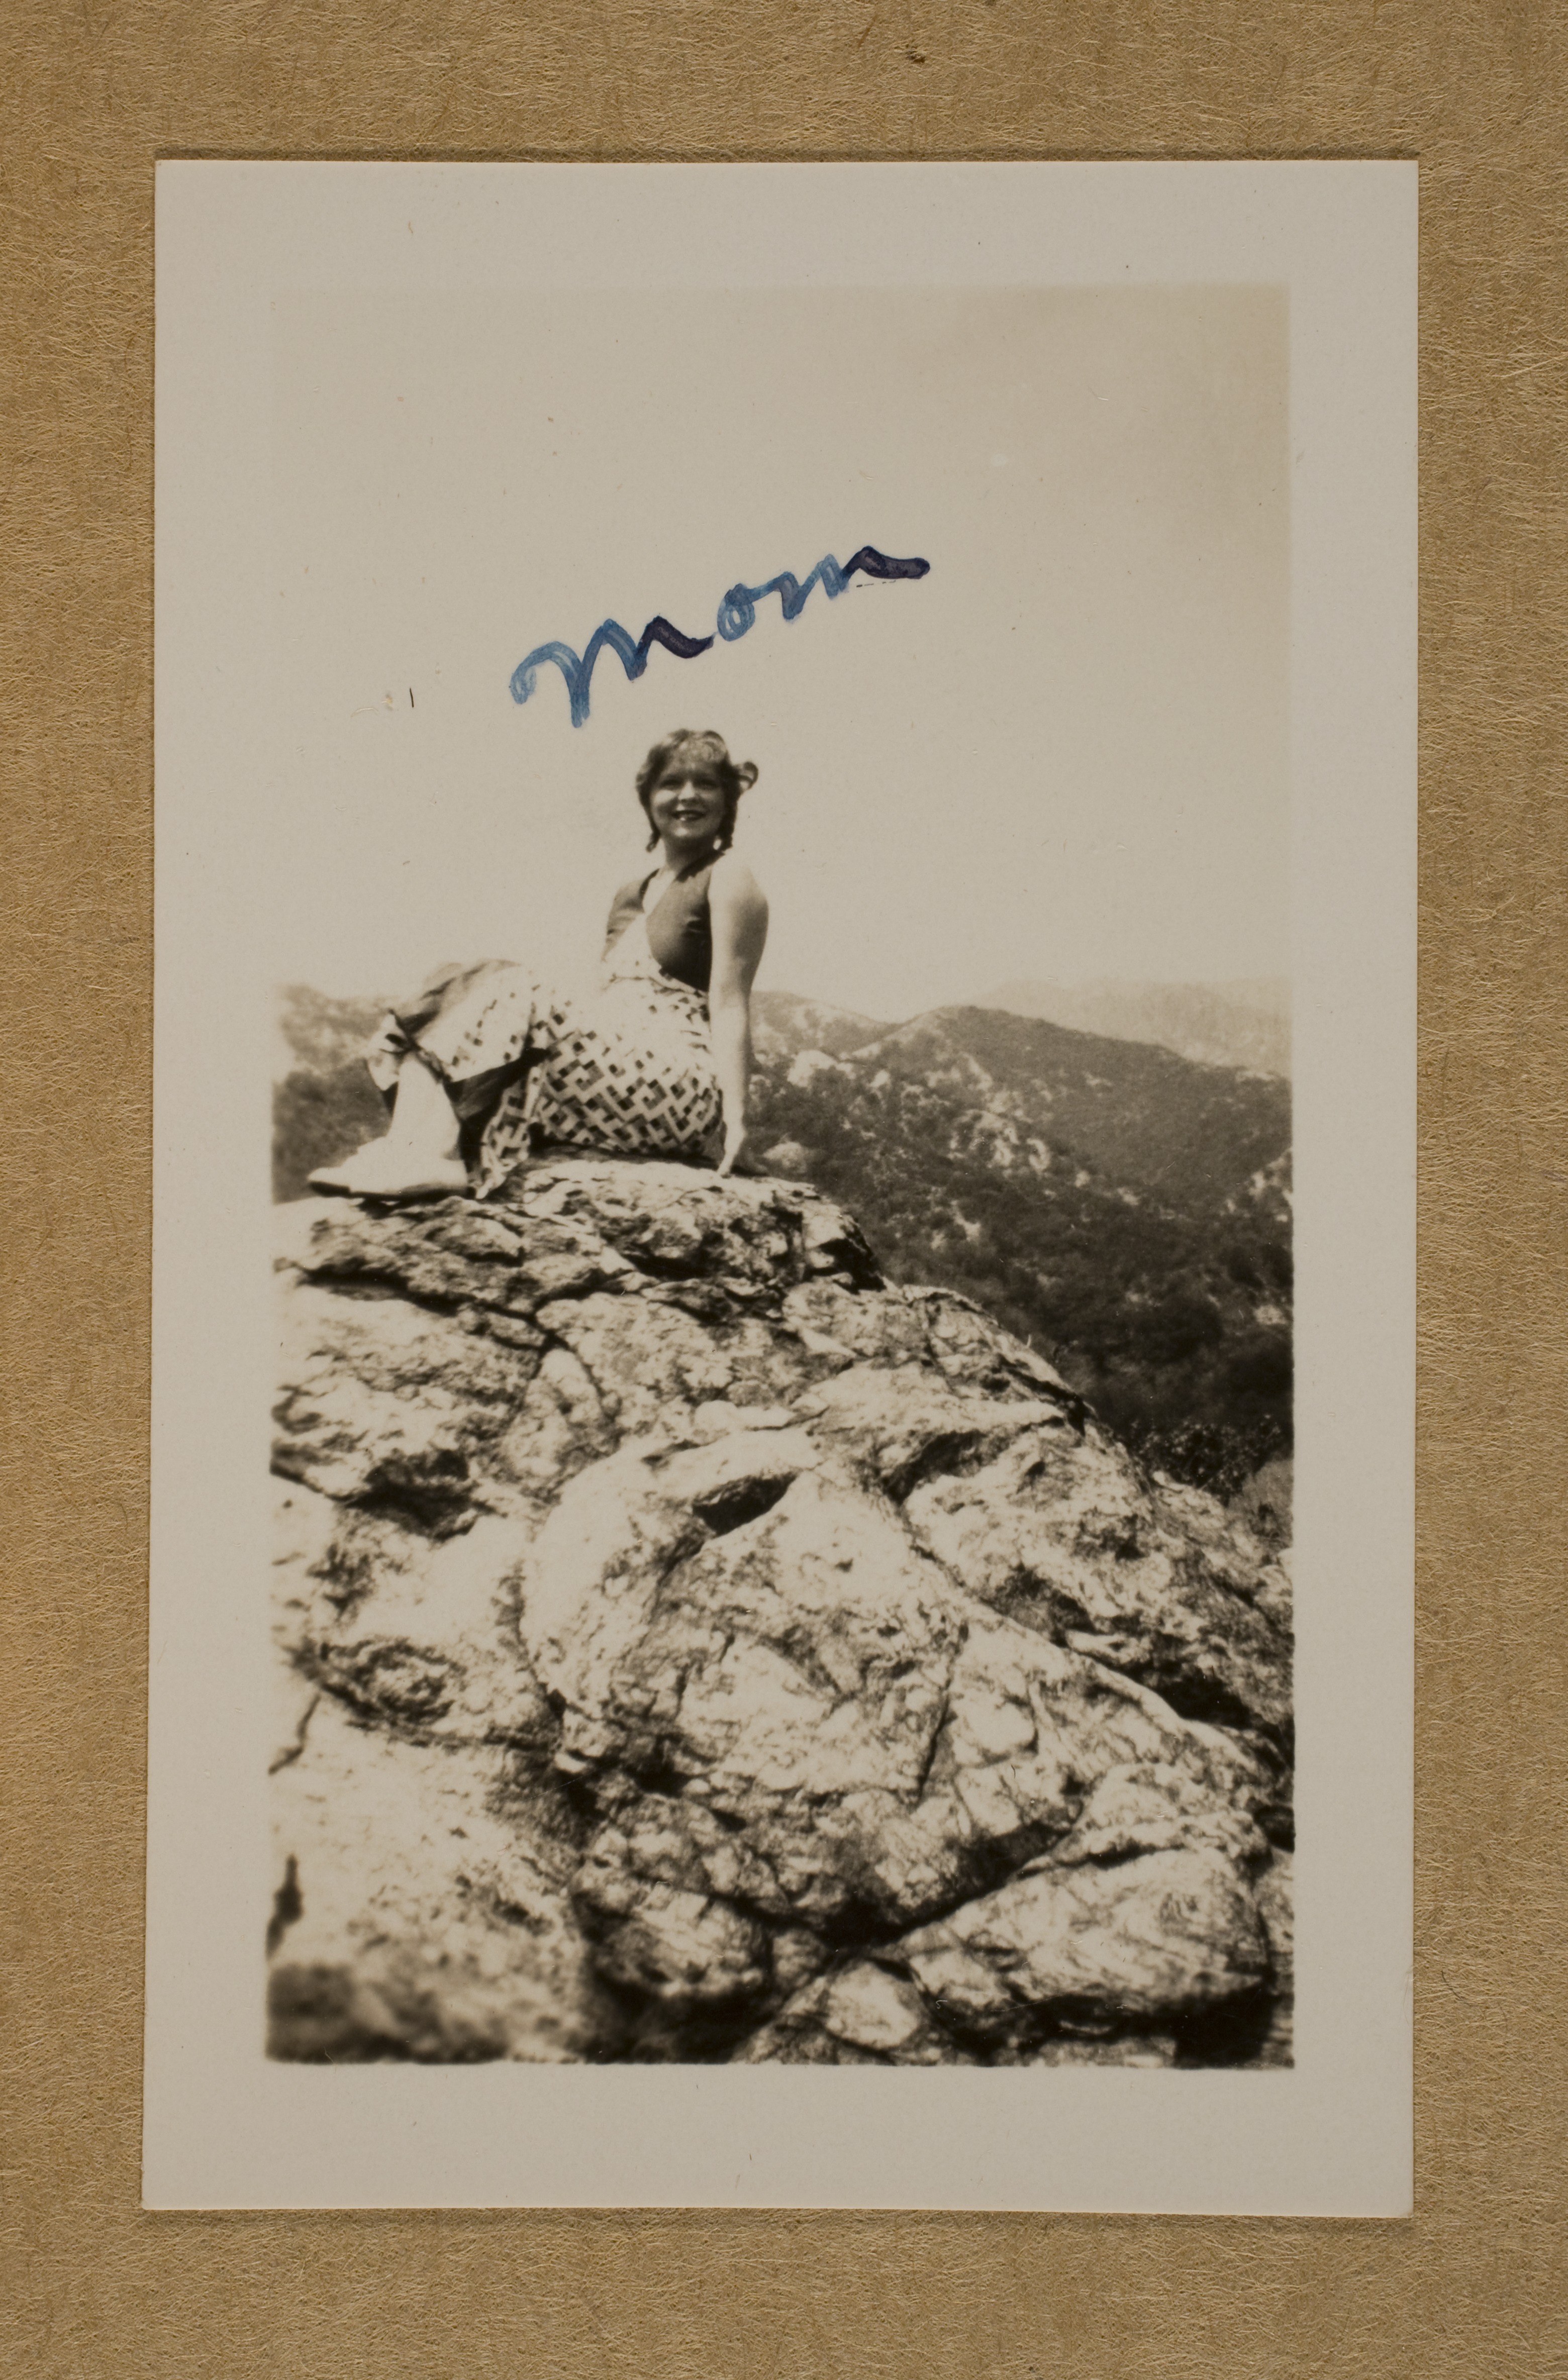 Clara Bow at unknown location: photographic print